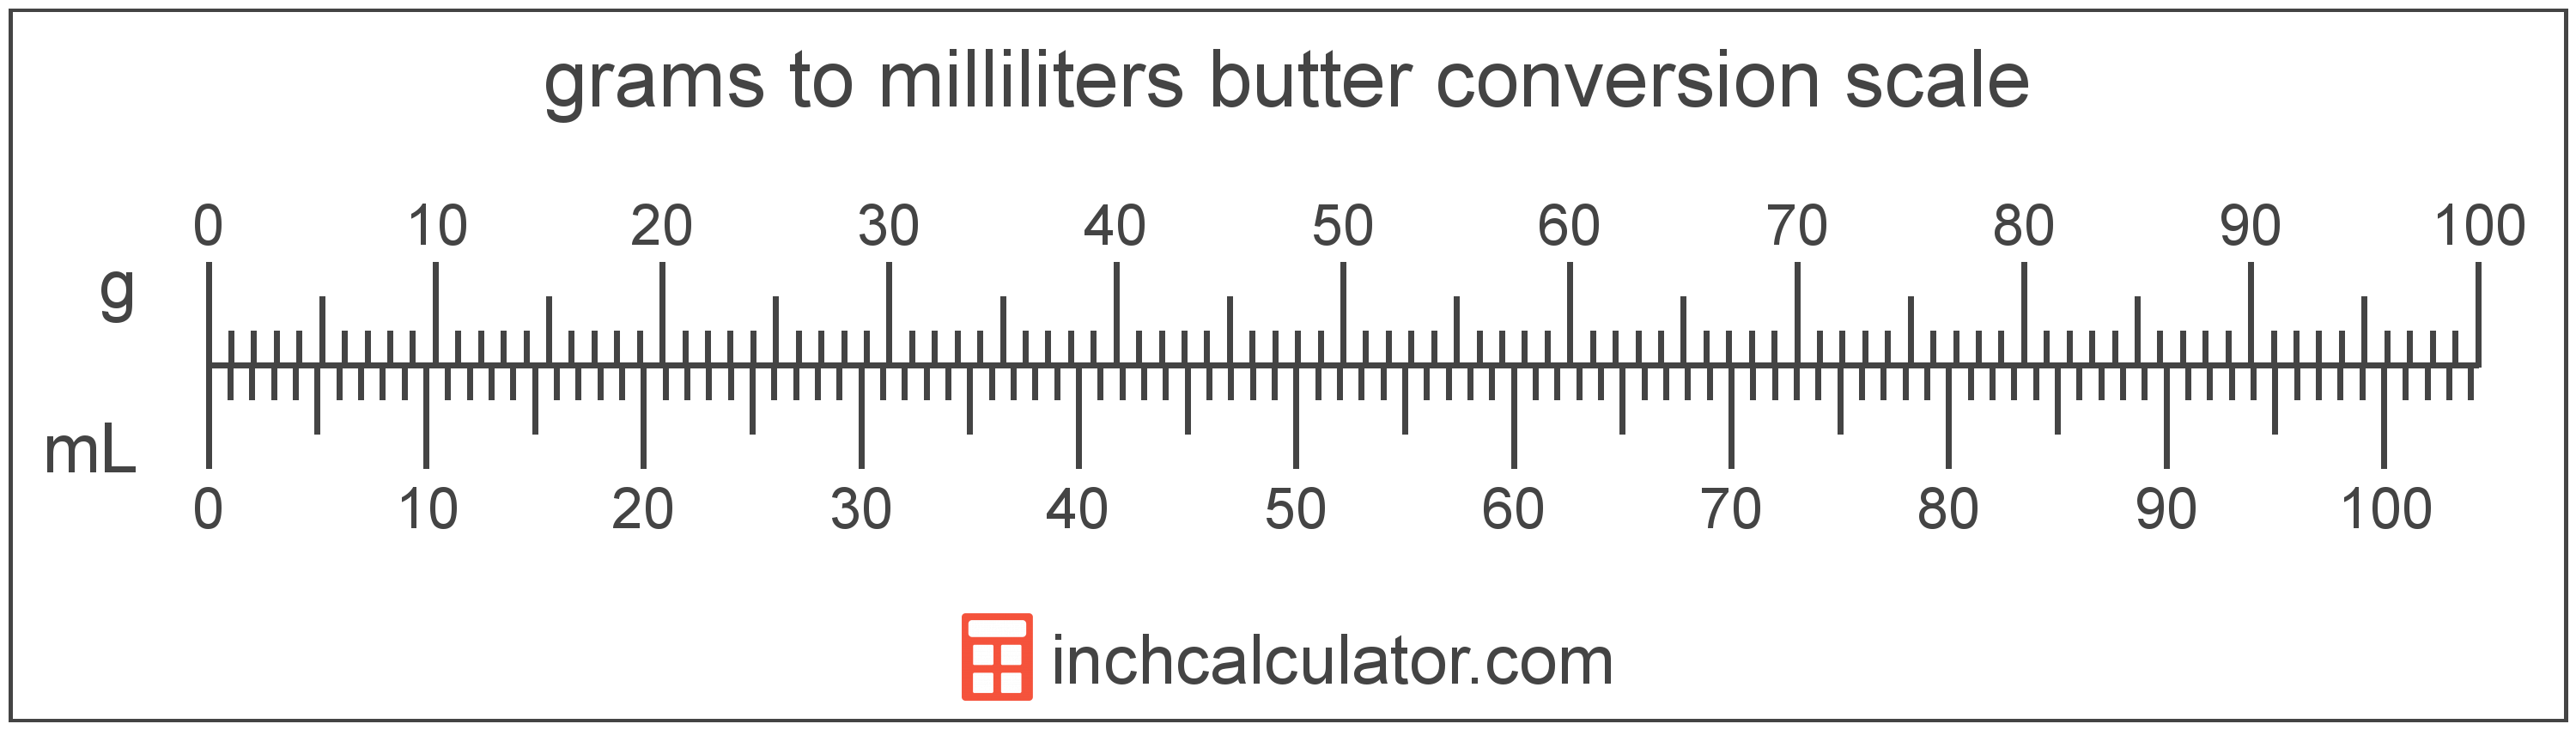 conversion scale showing grams and equivalent milliliters butter values